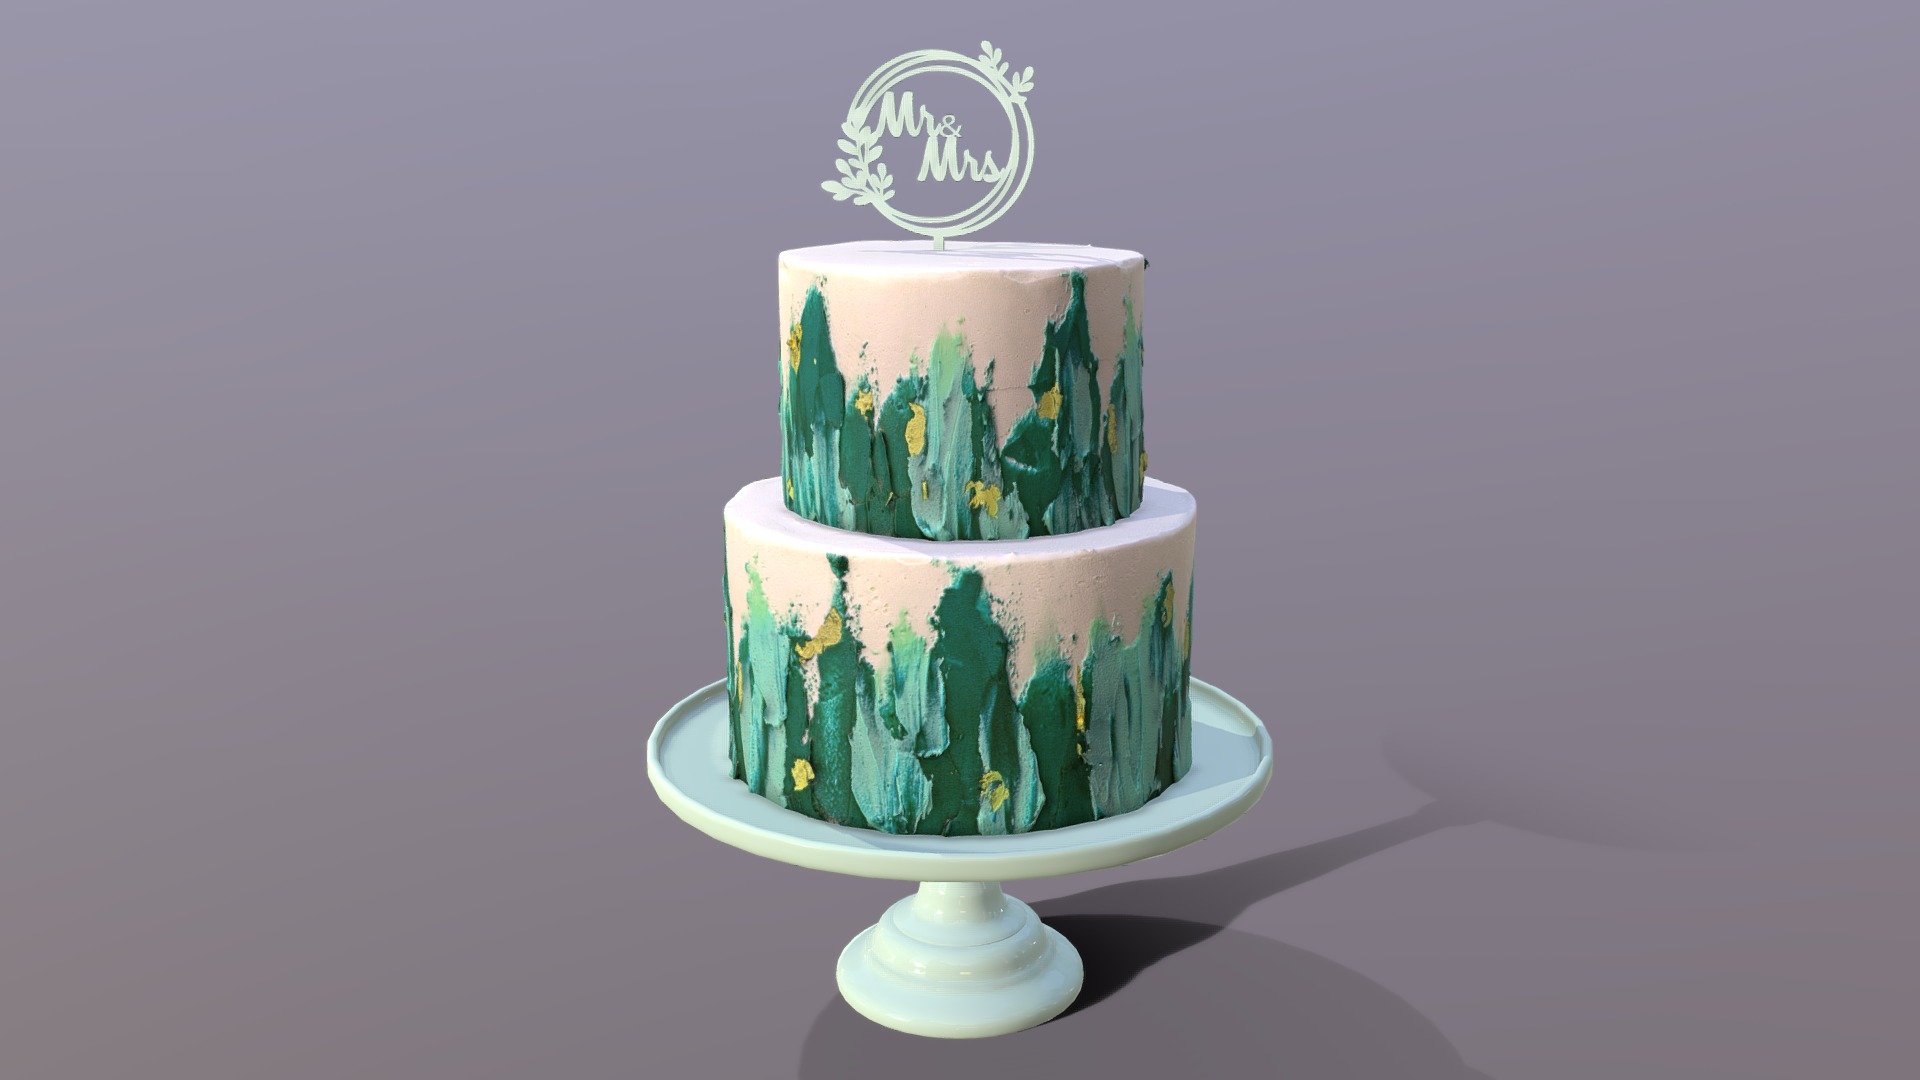 3D scan of an elegant Turquoise Wedding Cake on the Mosser glass stand which is made by CAKESBURG Online Premium Cake Shop in UK. You can also order real cake from this link: https://cakesburg.co.uk/products/elegant-silky-naked-cake?_pos=1&amp;_sid=075fc6f3e&amp;_ss=r

Textures 4096*4096px PBR photoscan-based materials Base Color, Normal, Roughness, Specular, AO) - Elegant Mr and Mrs Turquoise Wedding Cake - Buy Royalty Free 3D model by Cakesburg Premium 3D Cake Shop (@Viscom_Cakesburg) 3d model